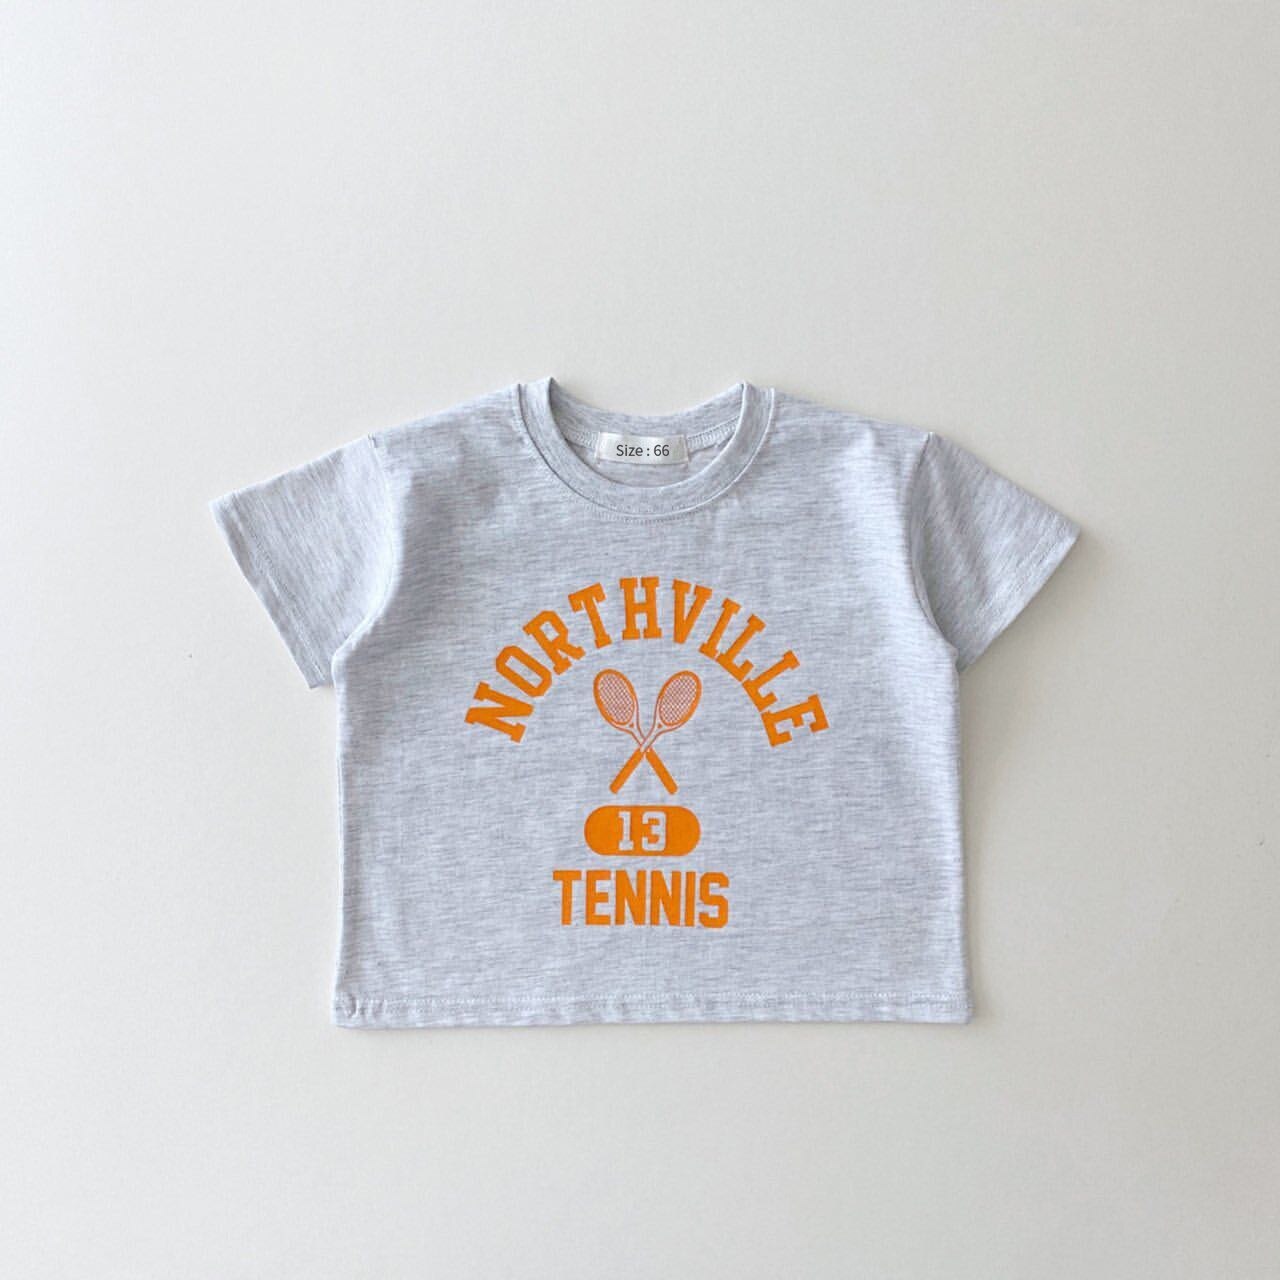 Toddler Kid Baby Boys Girls Clothes Summer Cotton T Shirt Short Sleeve Clothing Graffiti Print TShirt Children Top Infant Outfit